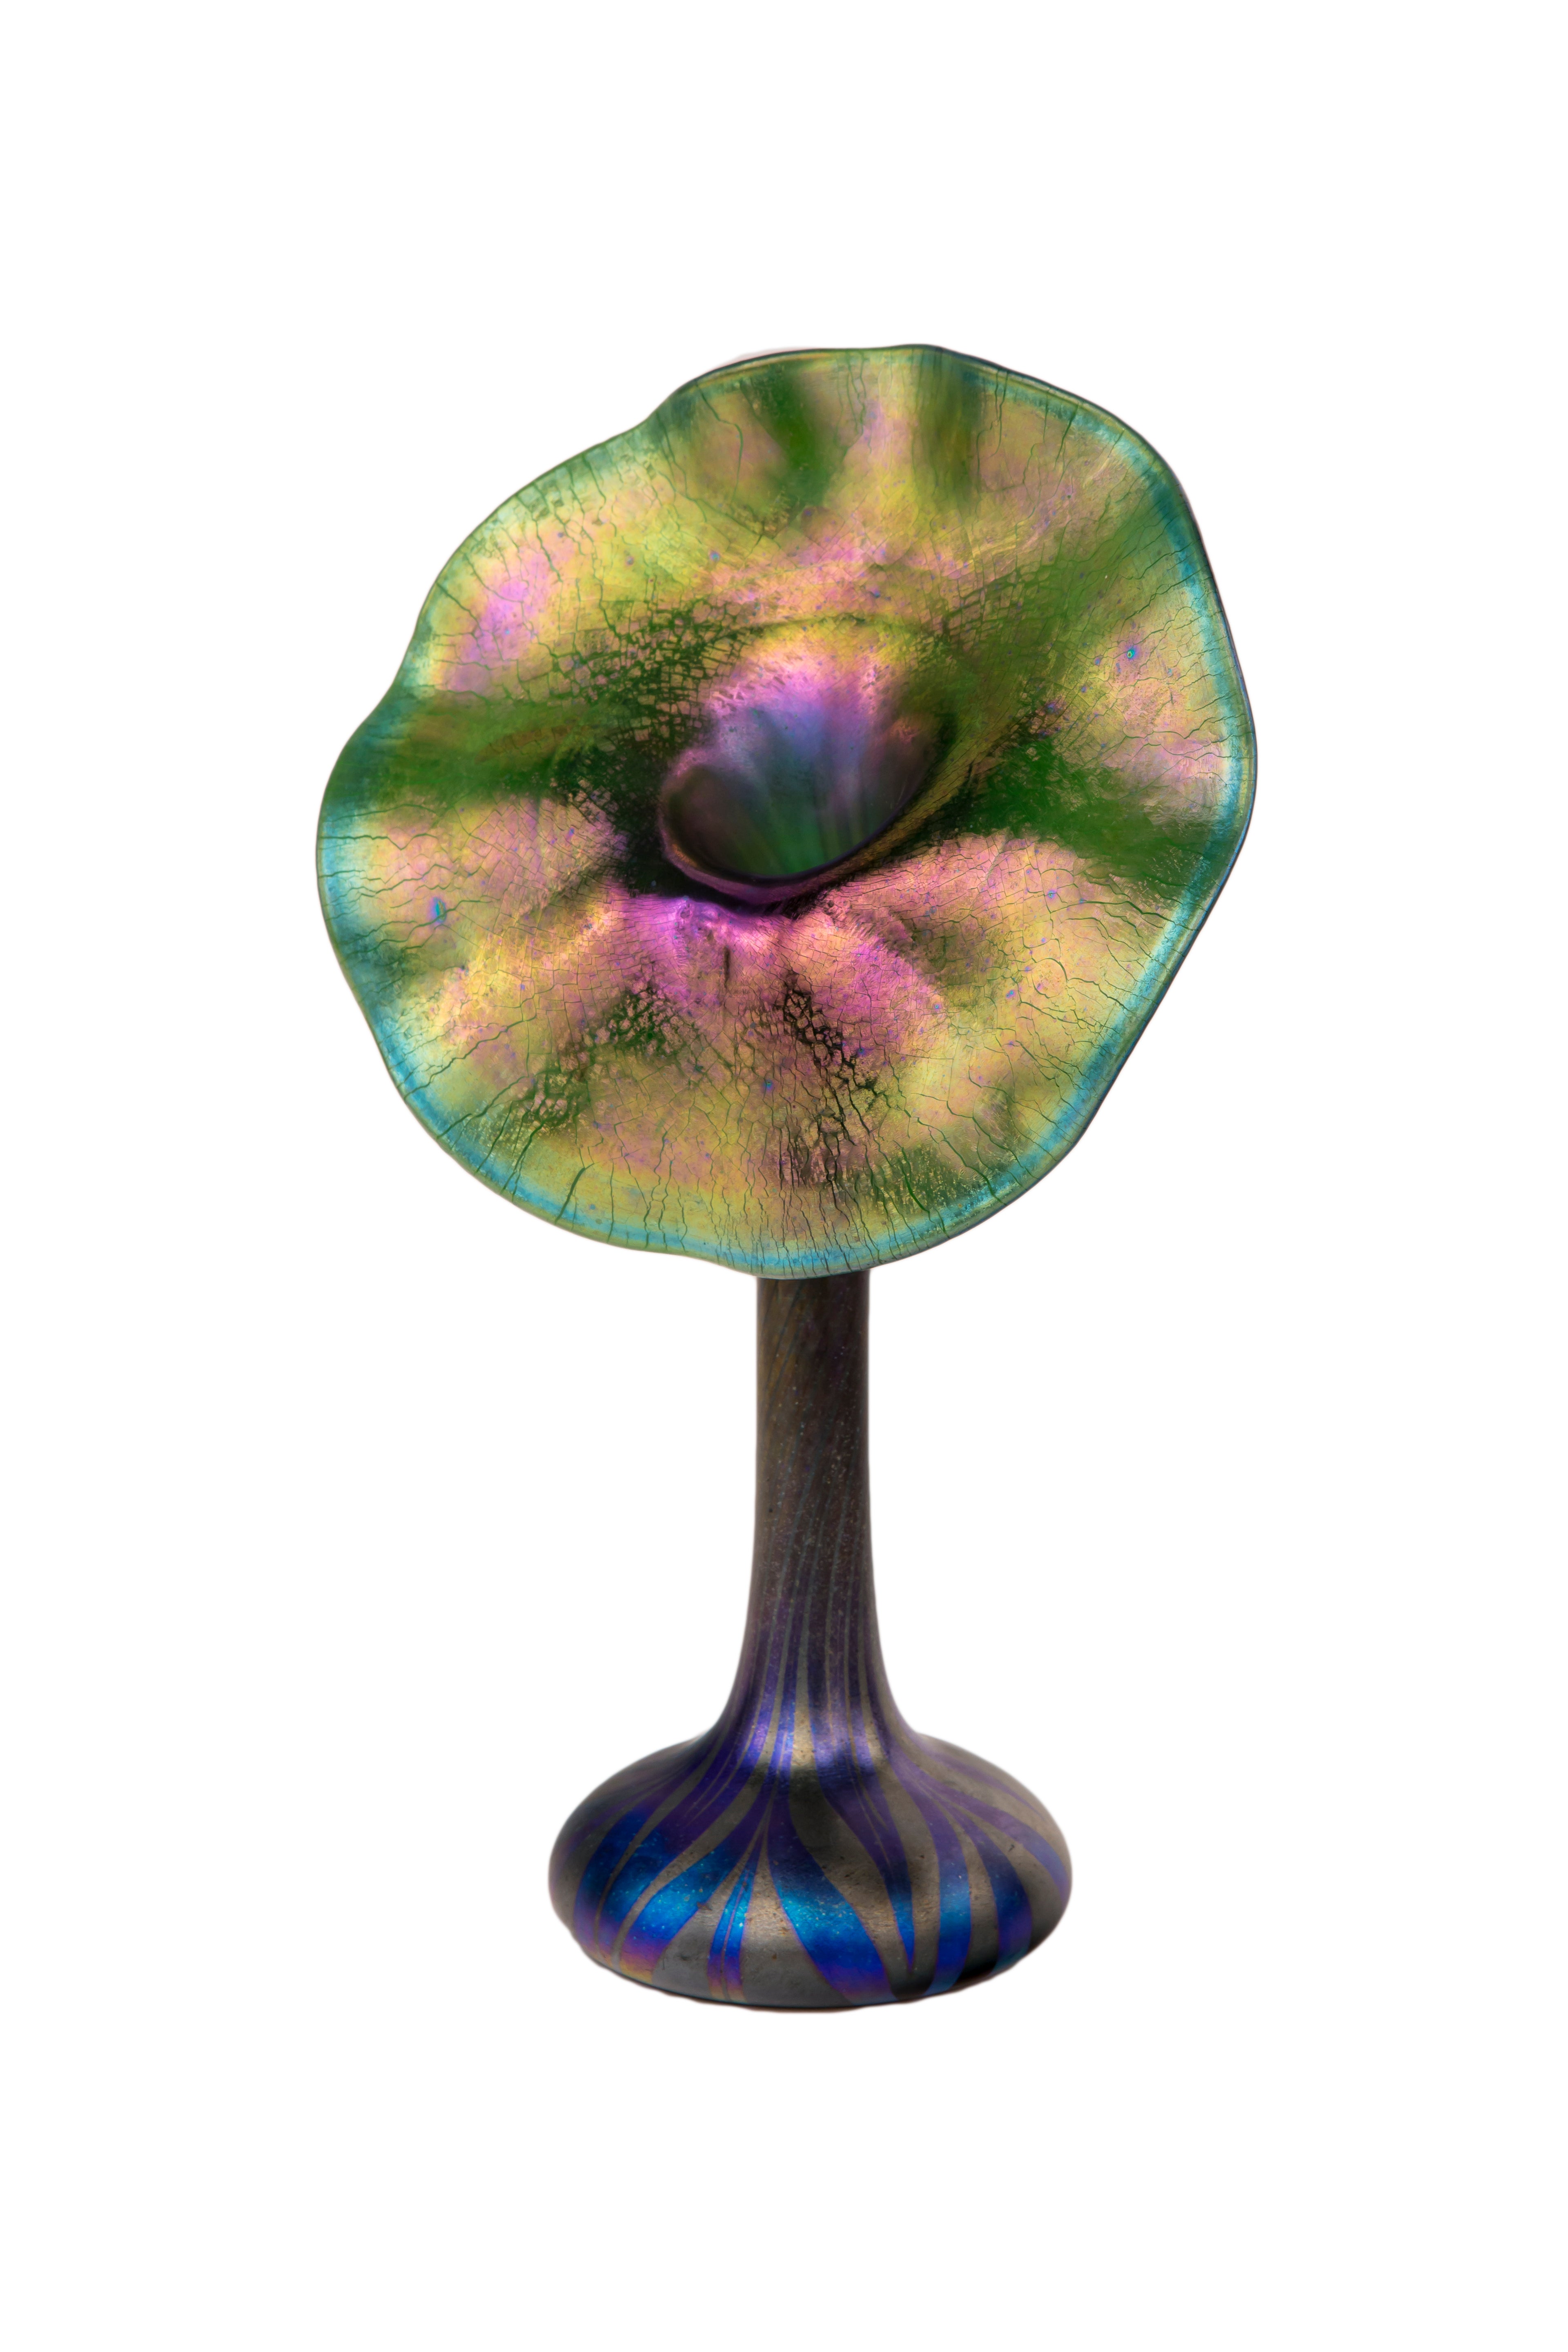 A Decorated "Jack-in-the-Pulpit" Vase